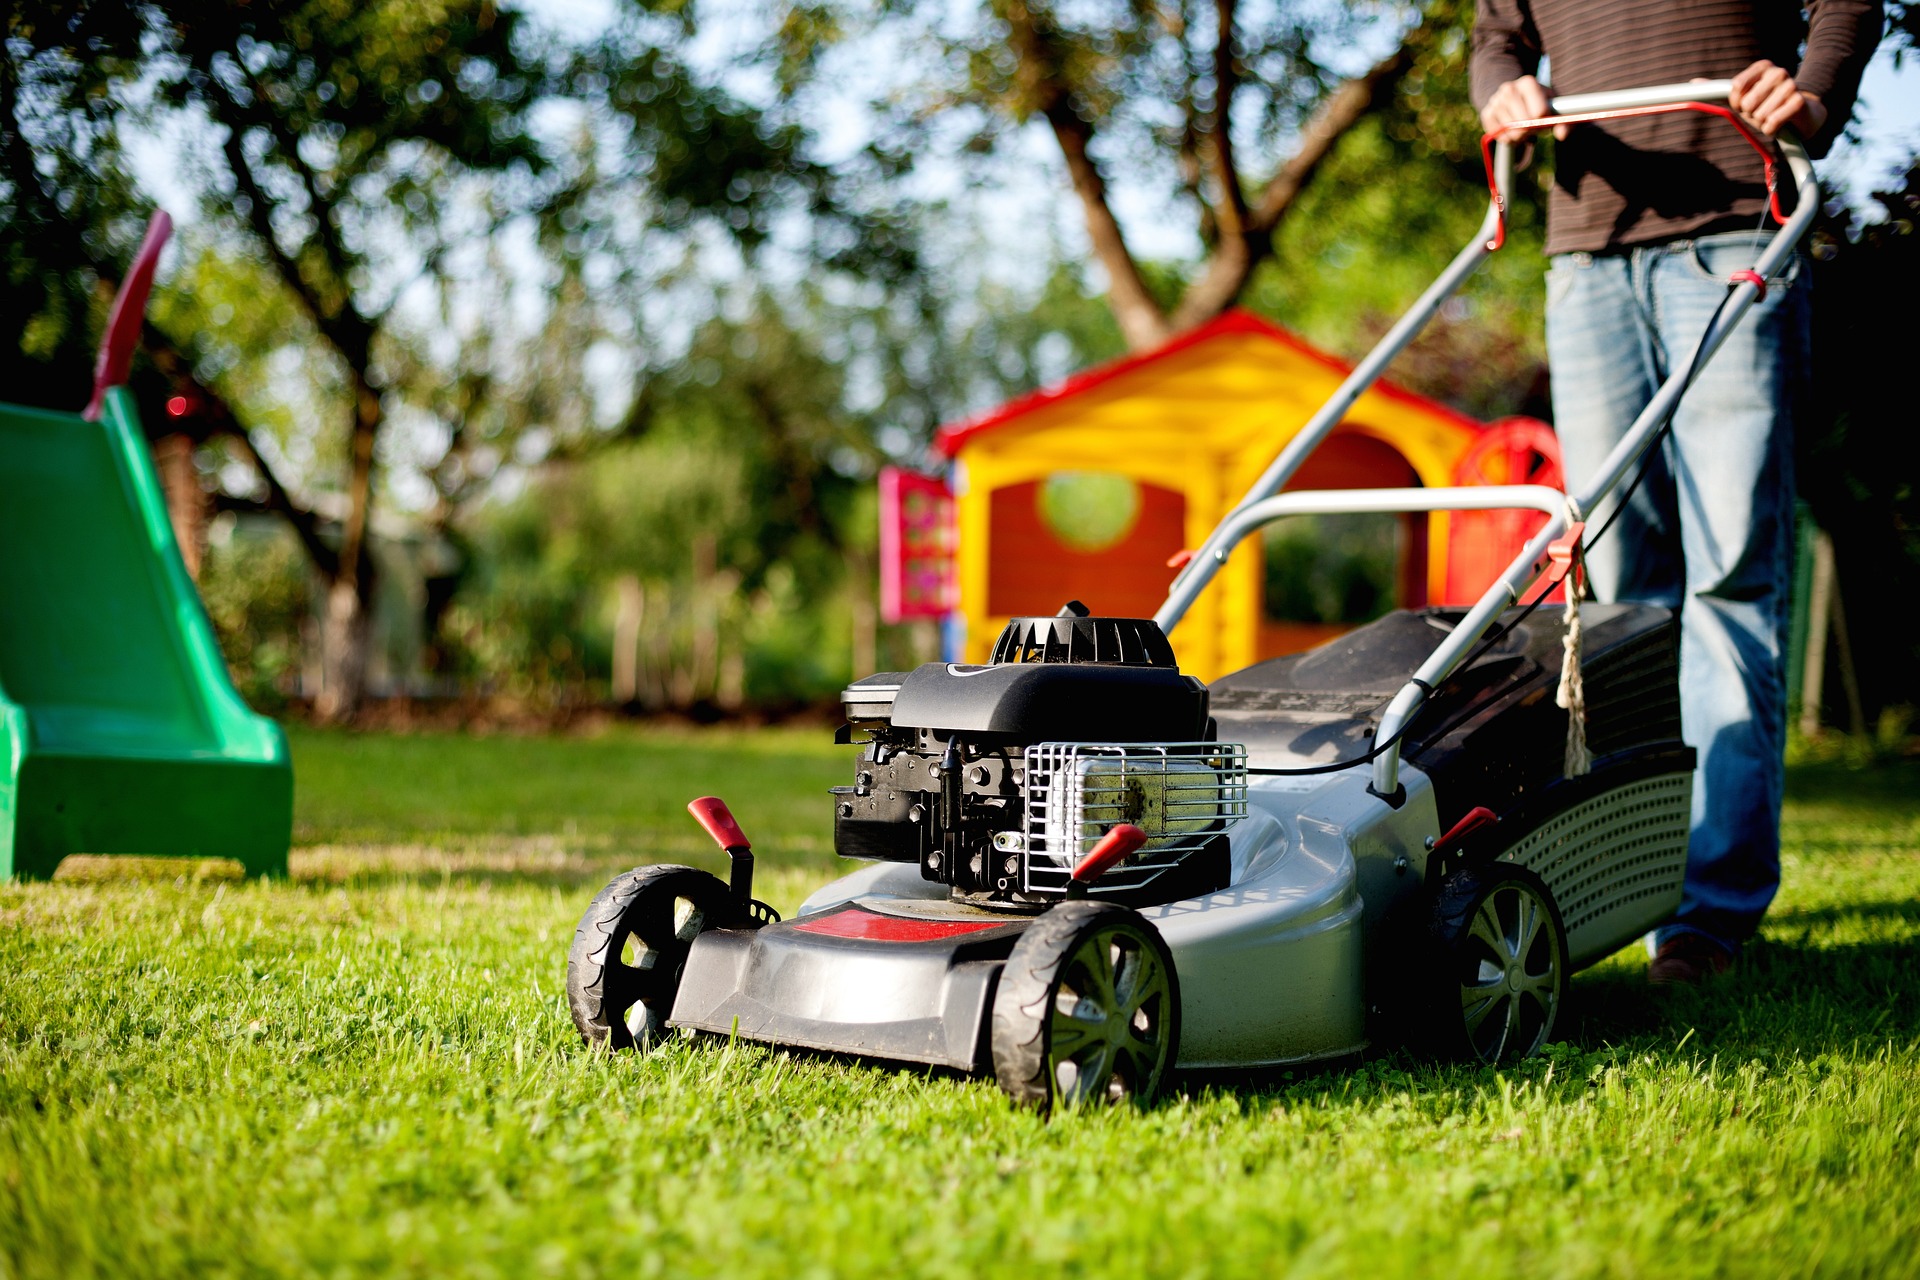 Lawn Mower with playground on the background